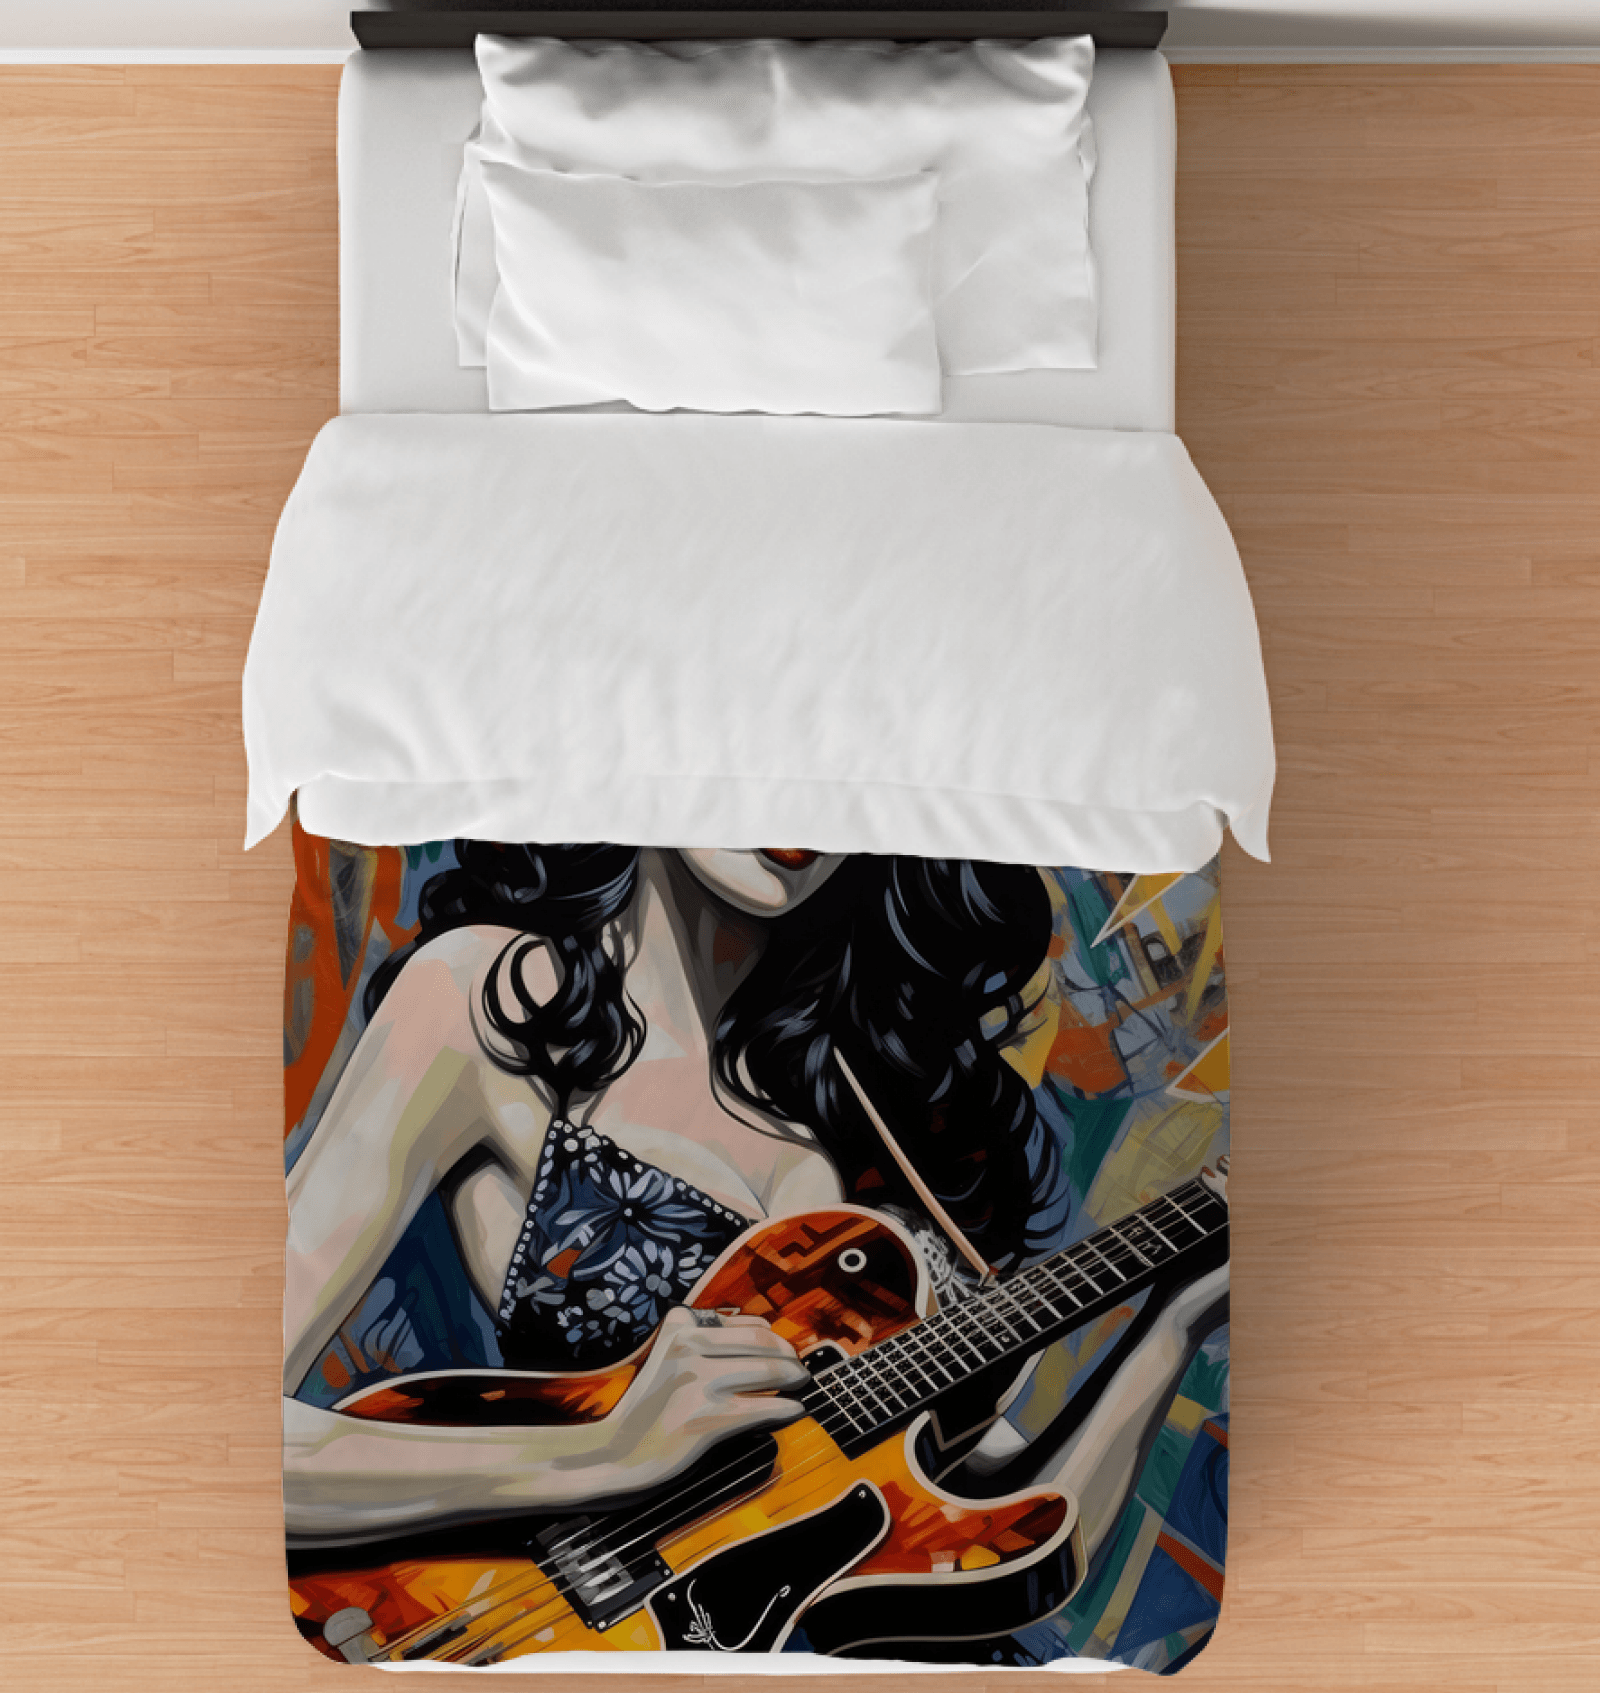 Guitar-towel-for-soothing-comfort